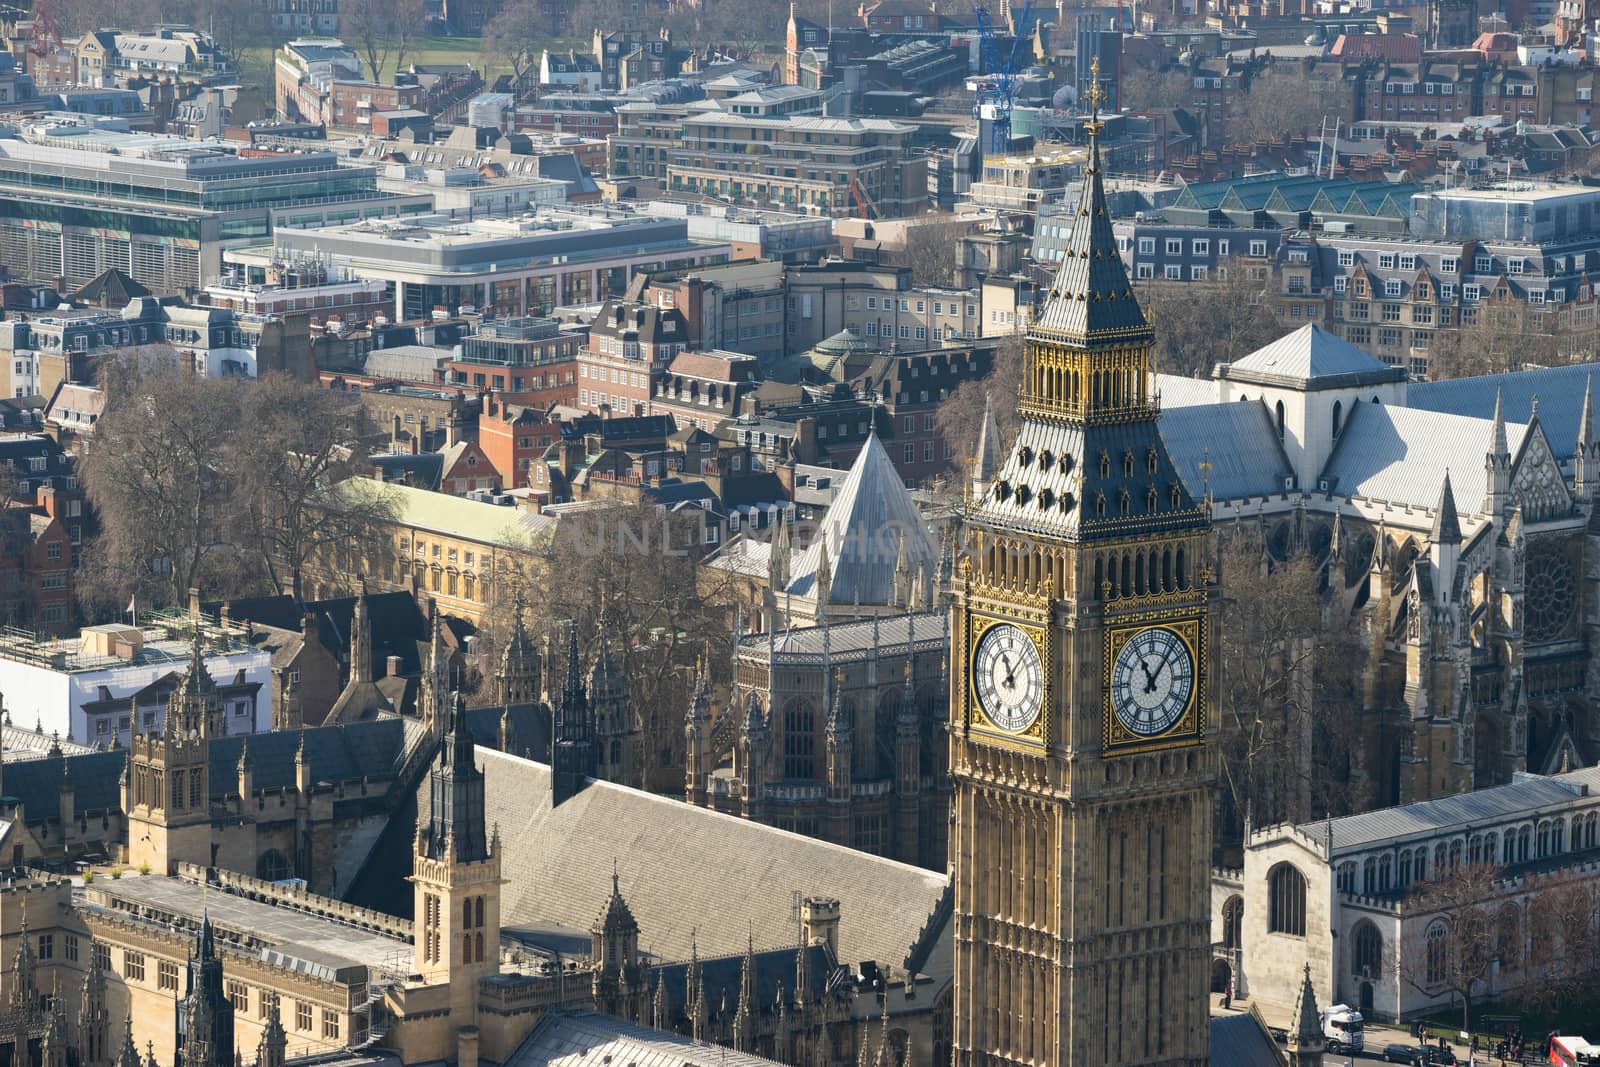 Big Ben and Westminster abbey, London, England by Alicephoto